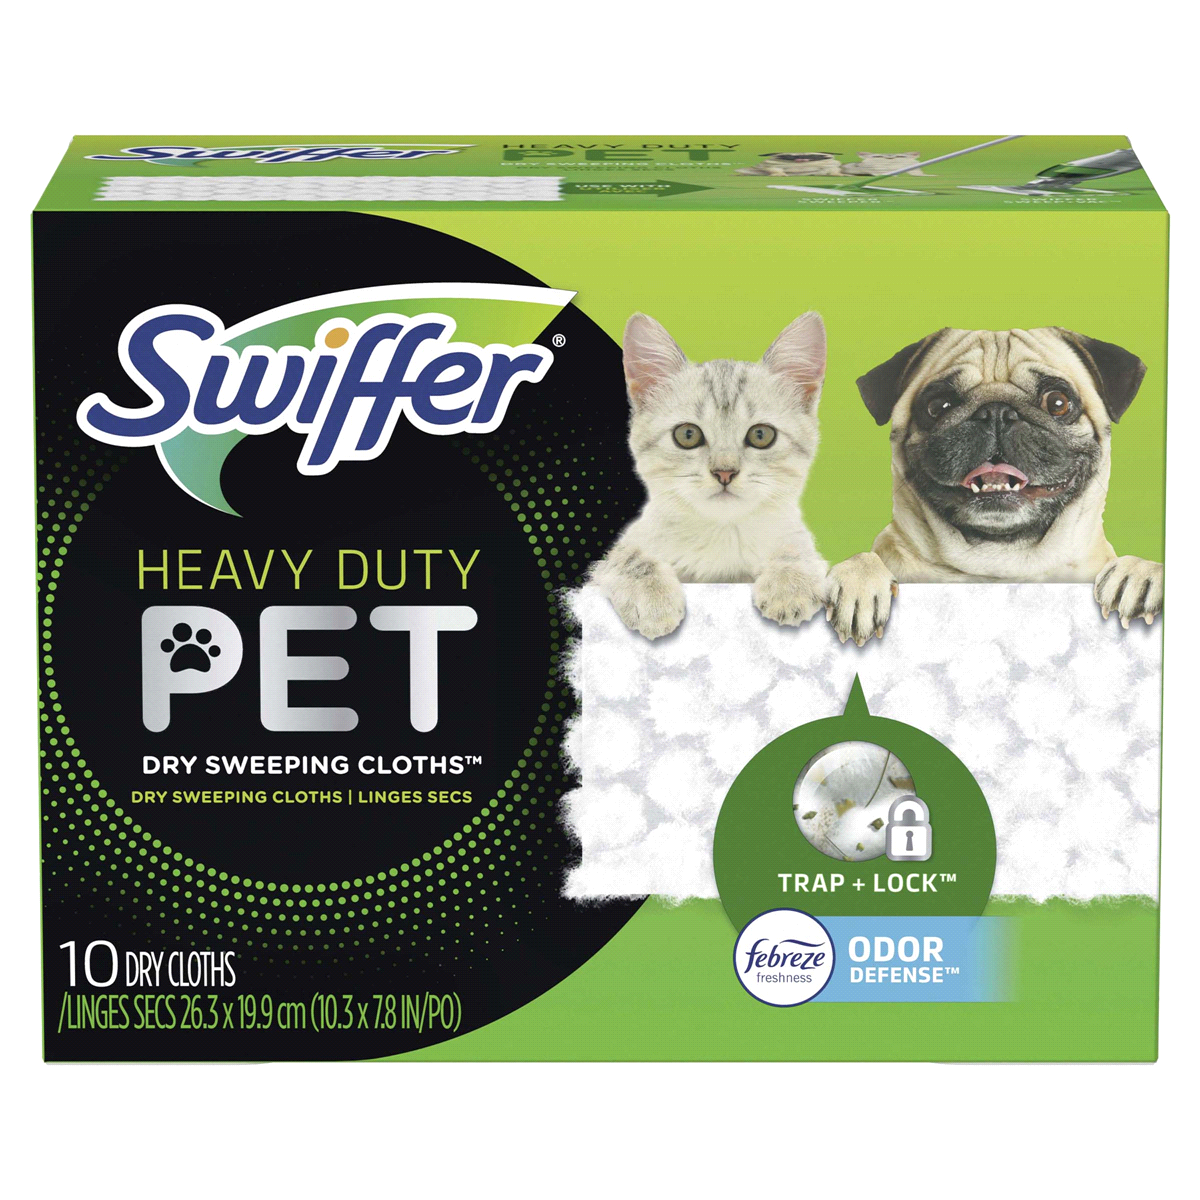 slide 1 of 2, Swiffer Heavy Duty Pet, Dry Sweeping Cloth Refills with Febreze Odor Defense, 10 ct